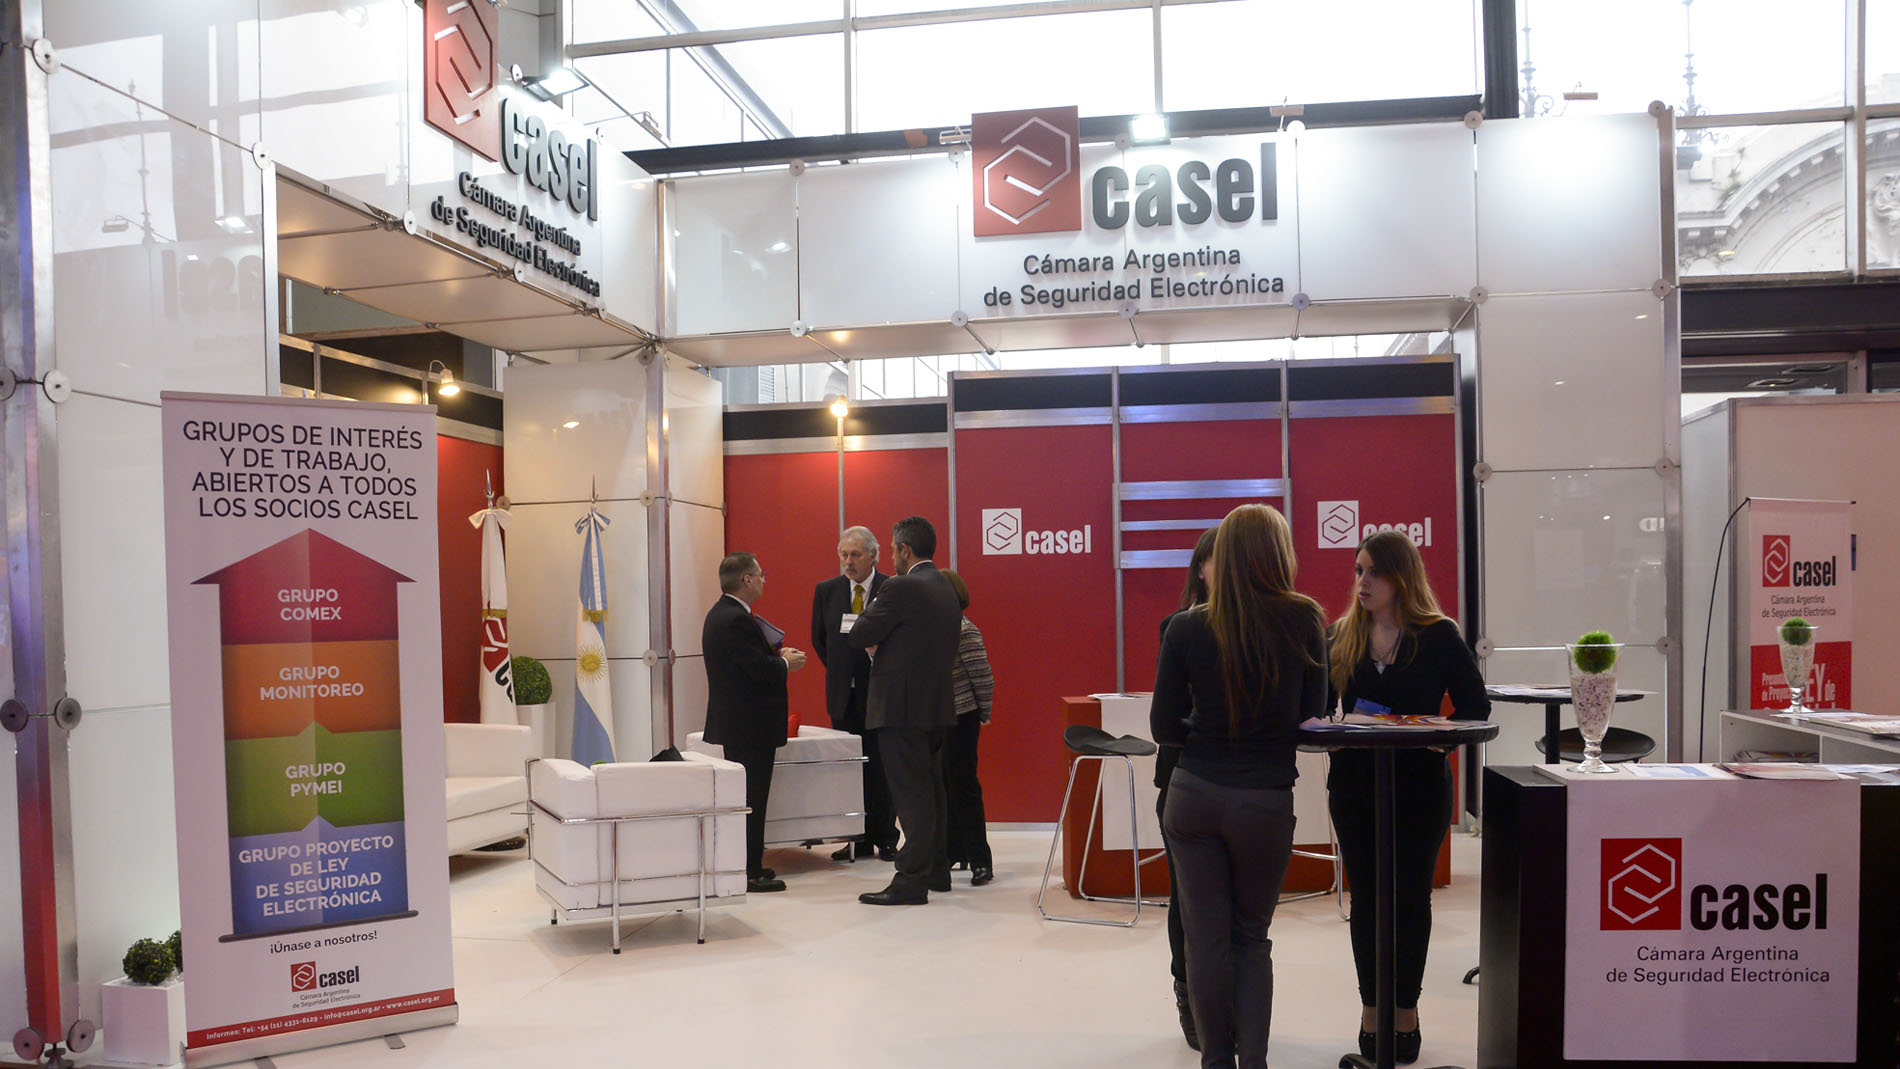 CASEL - Argentine Chamber of Electronic Security